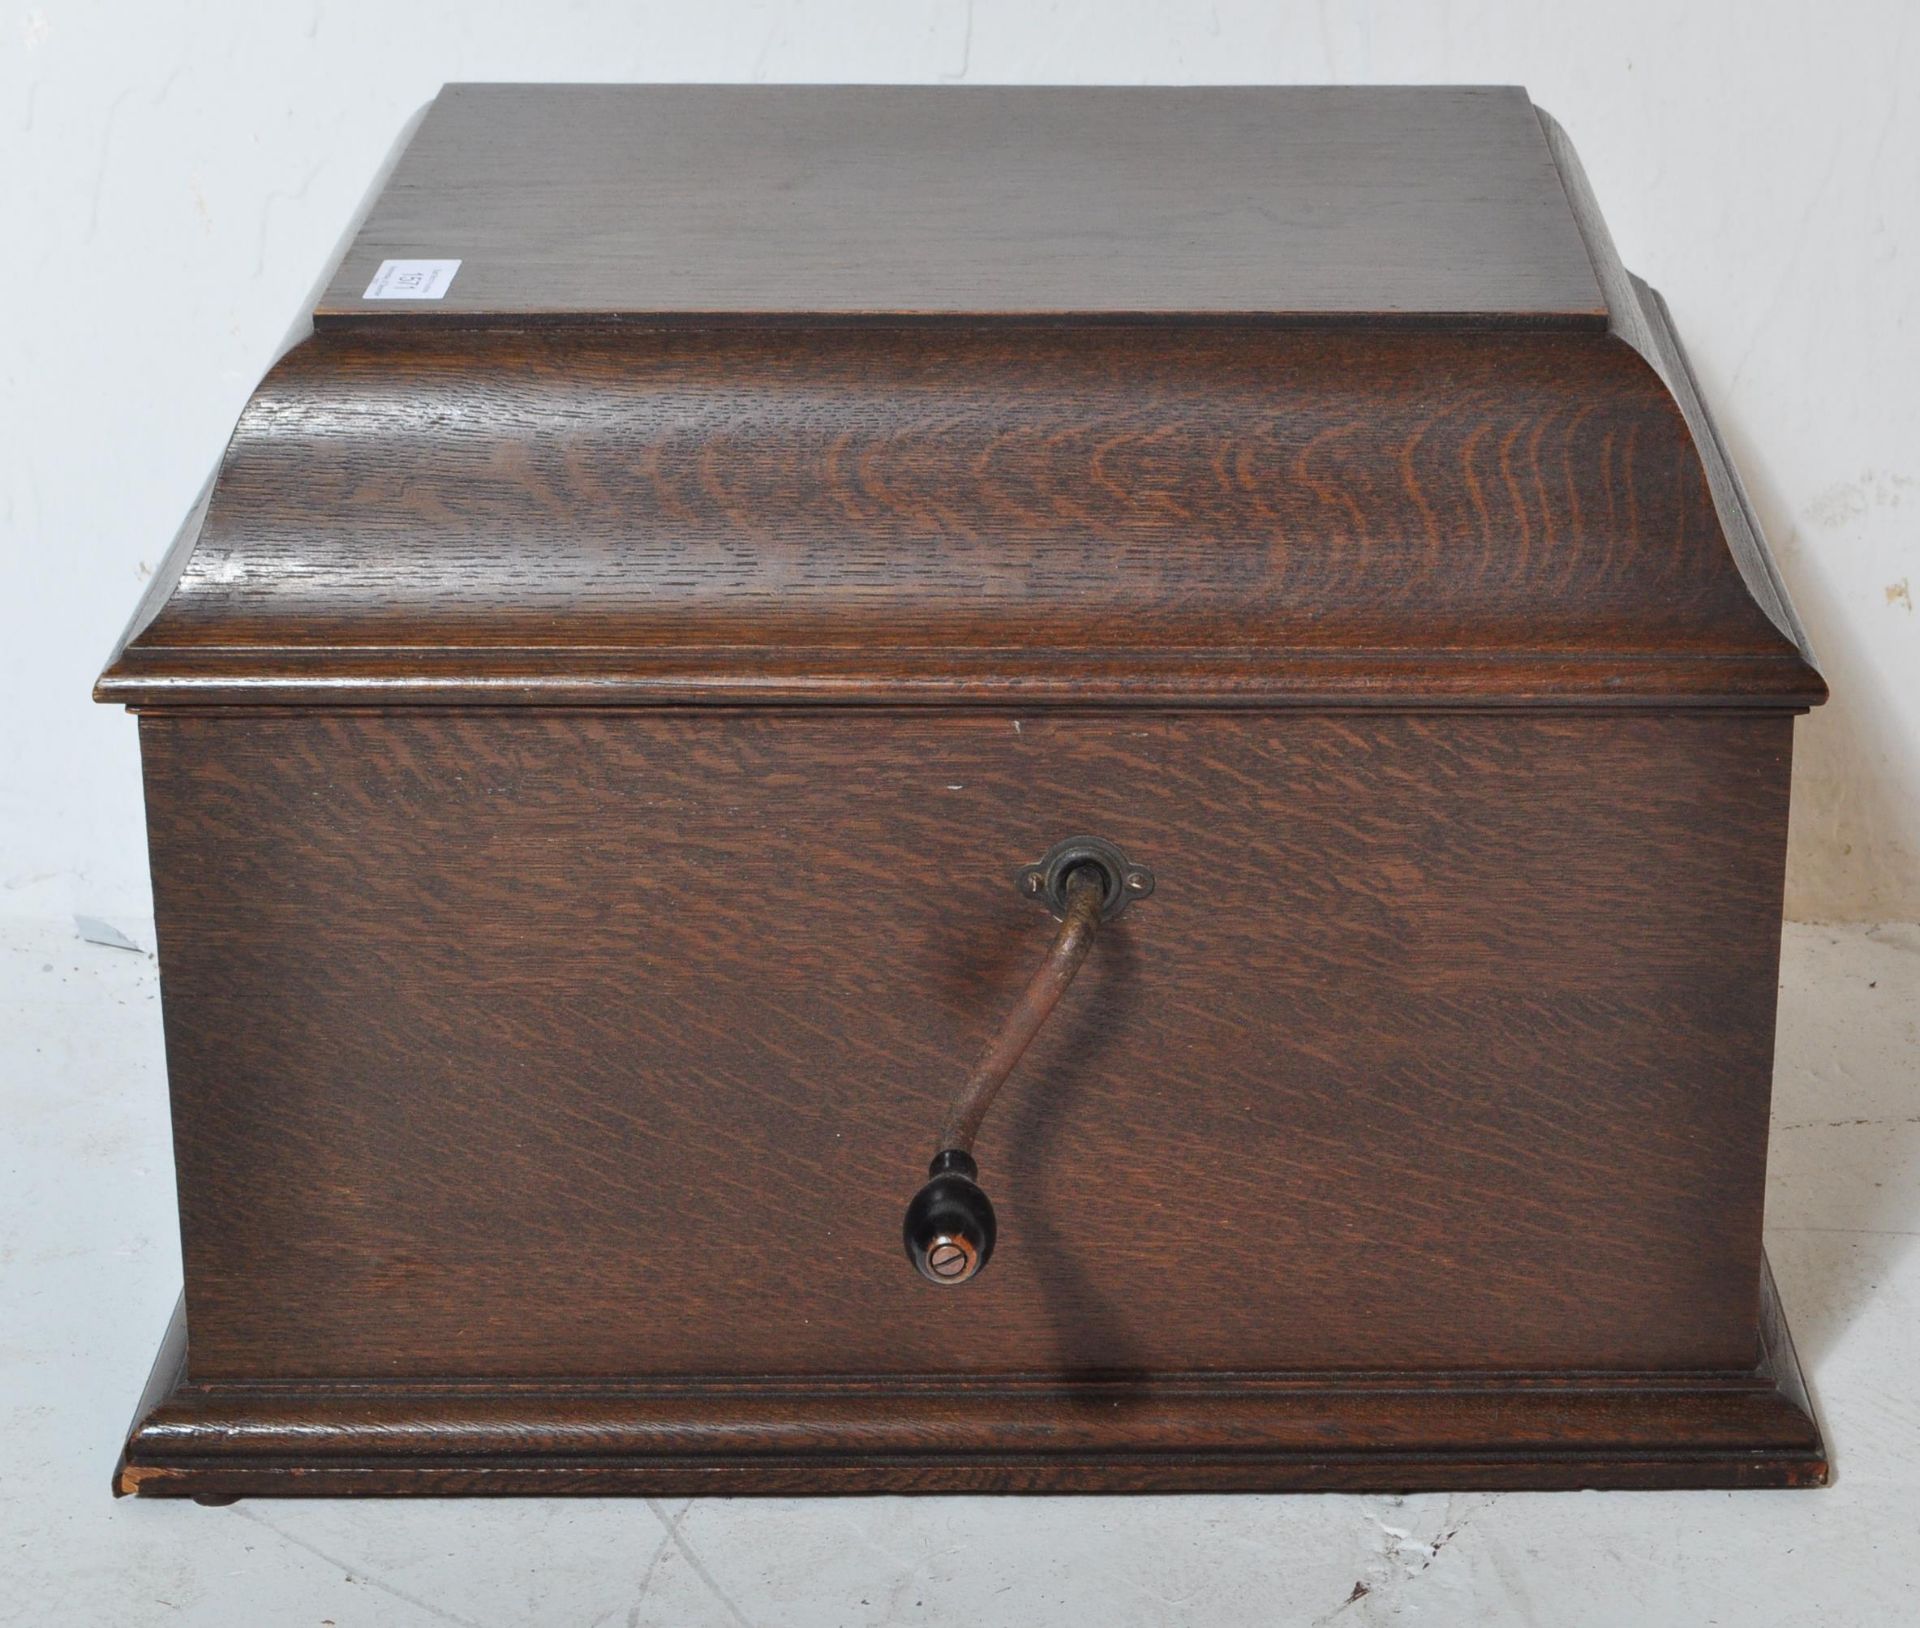 1920'S OAK CASED TABLE TOP GRAMAPHONE BY HMV - Image 2 of 5